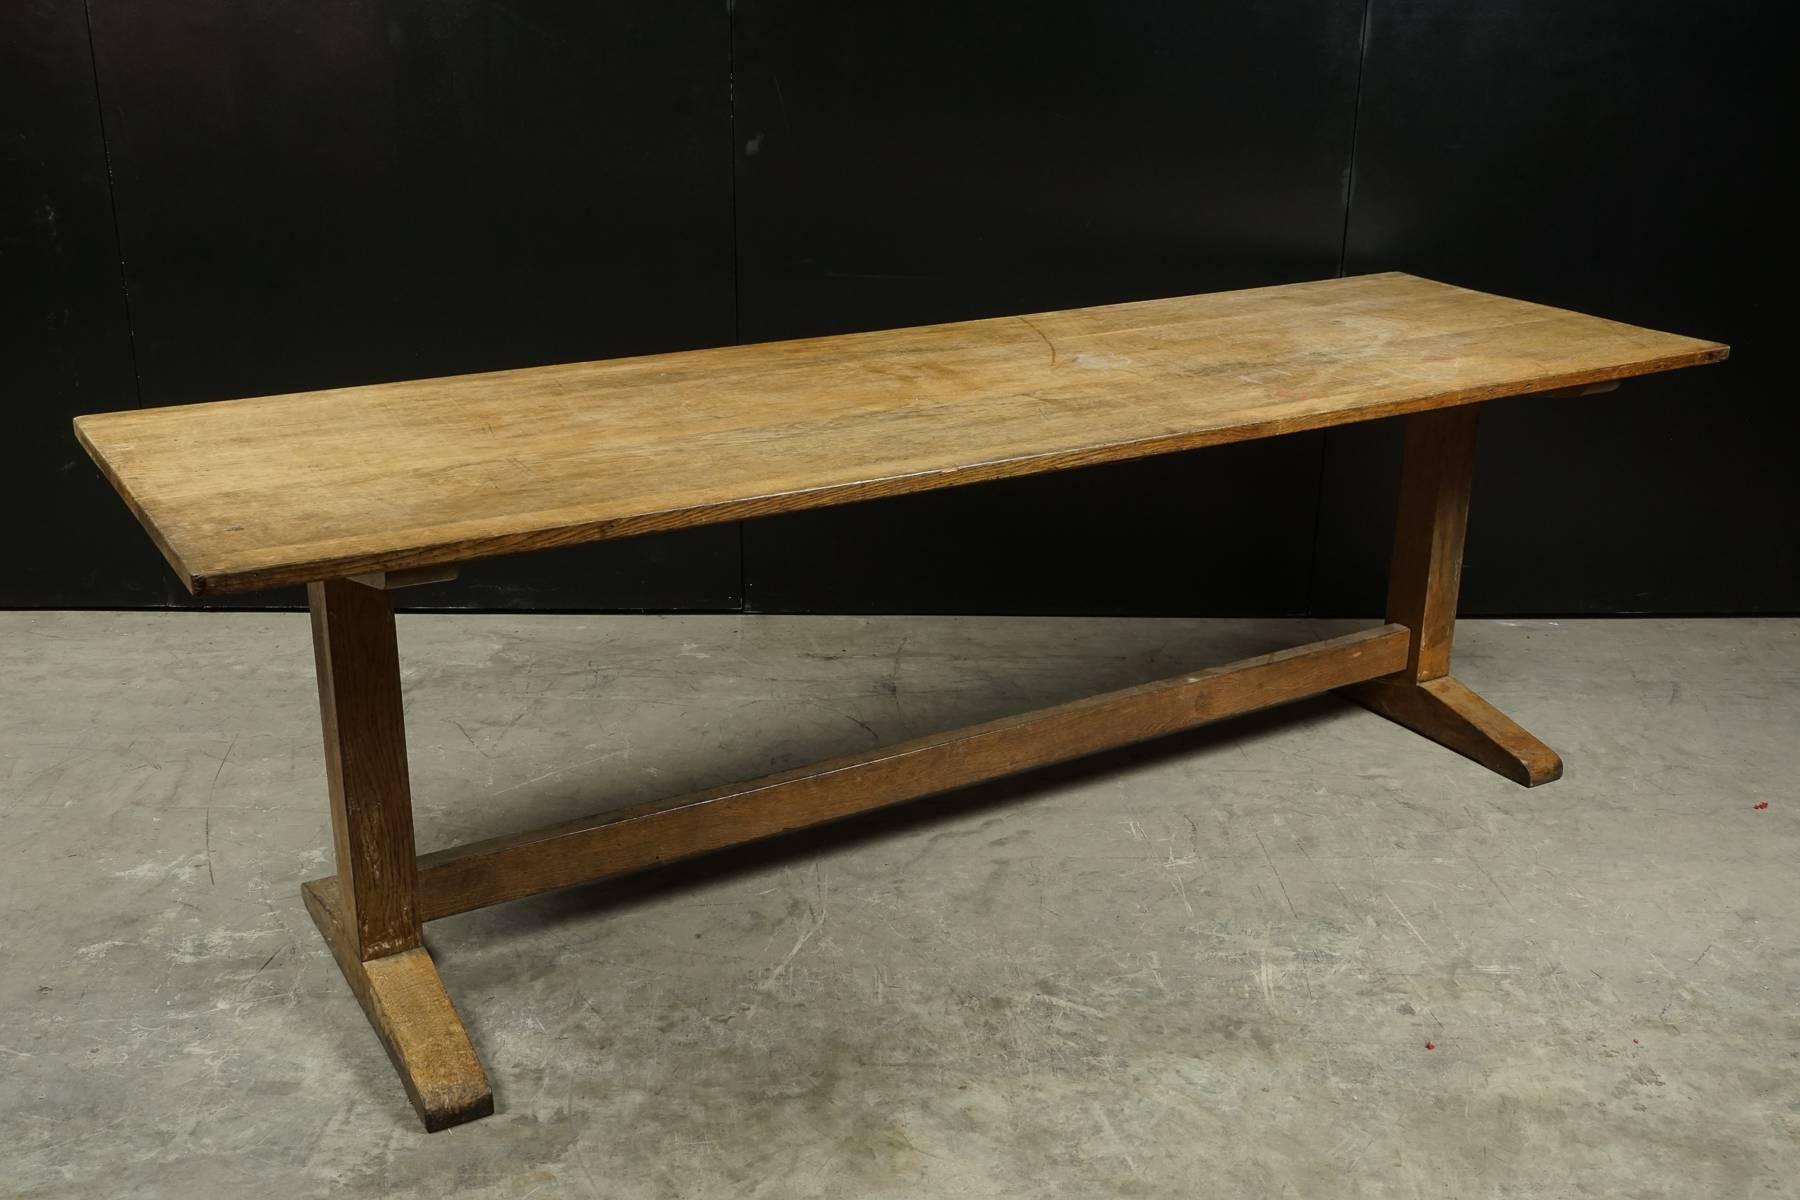 Oak dining table from England, circa 1960. Large model with solid construction, presumably from a university.